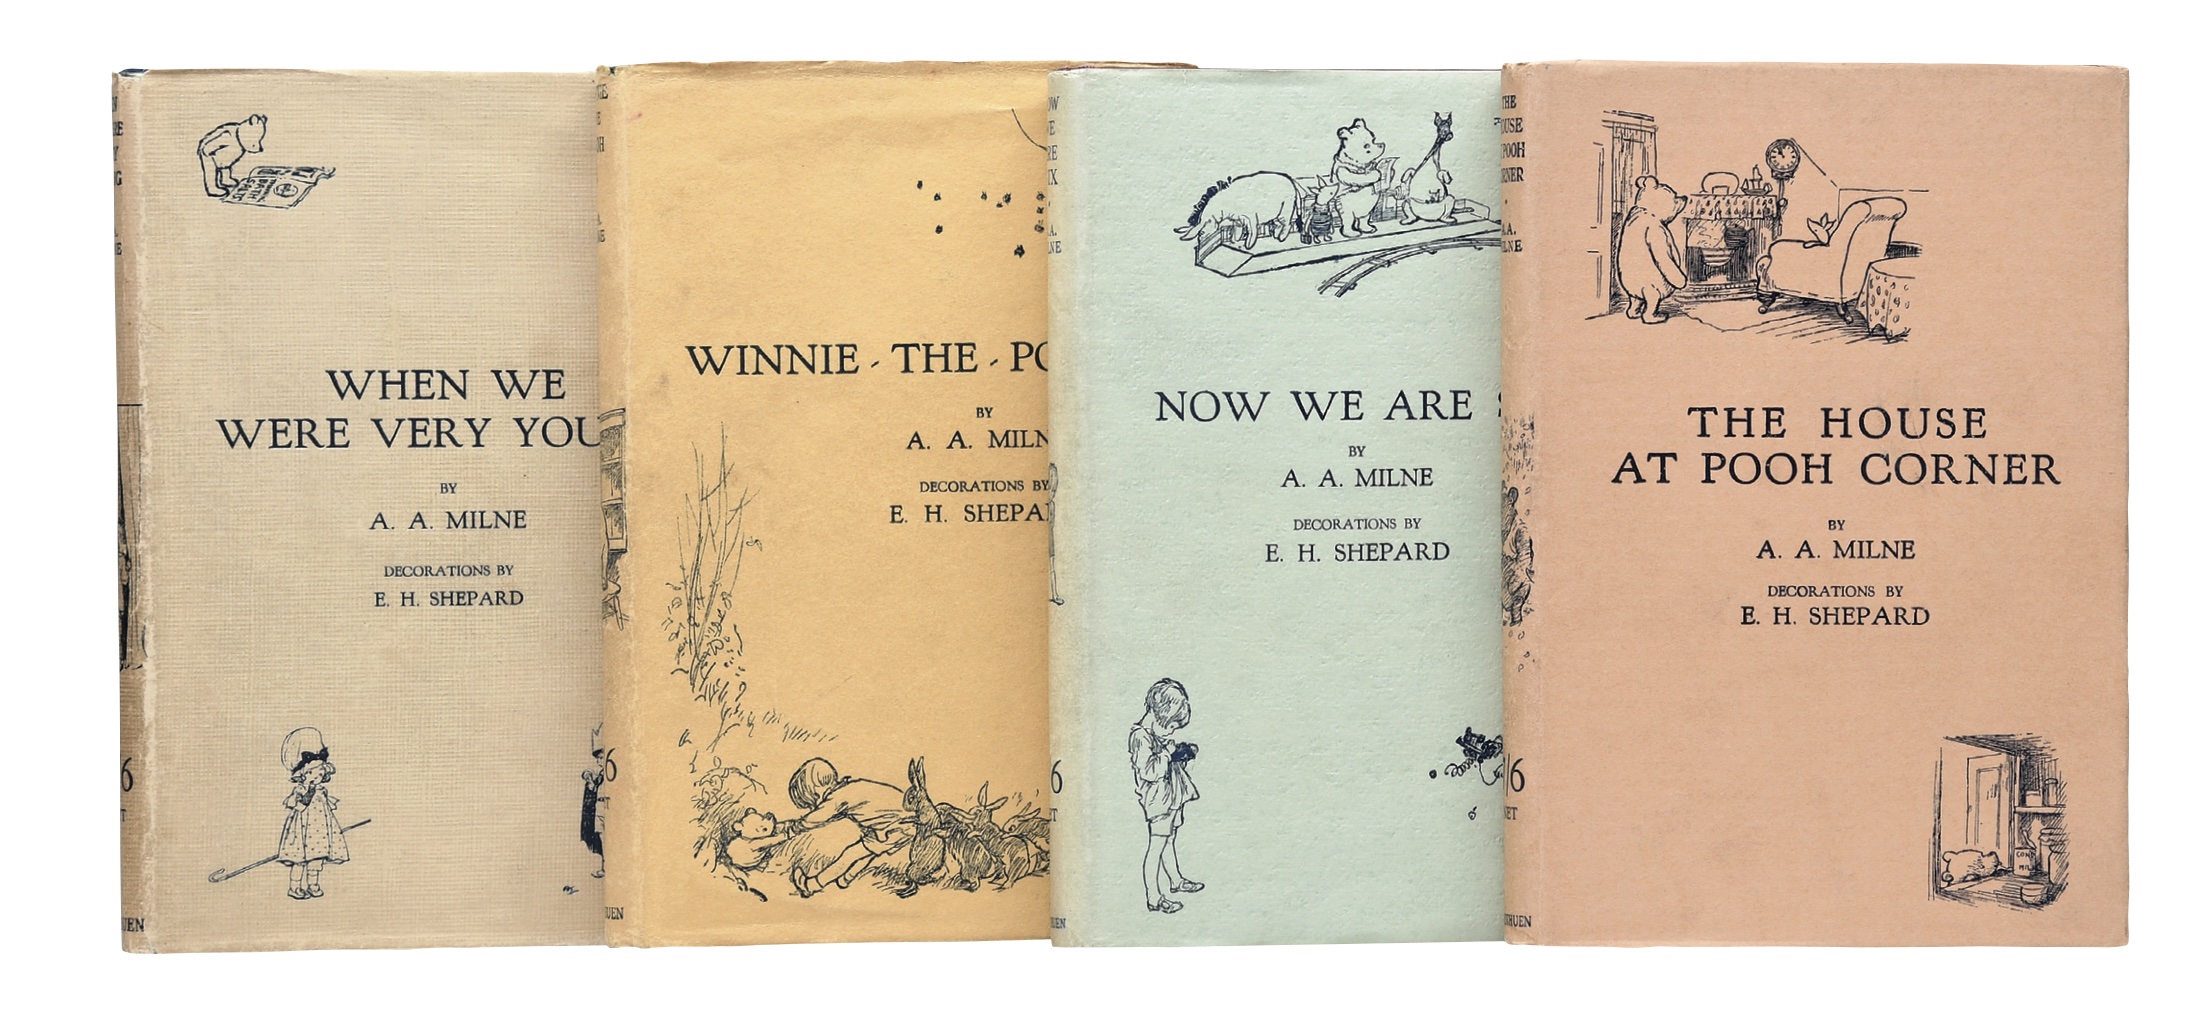 A collection of Winnie-the-Pooh books